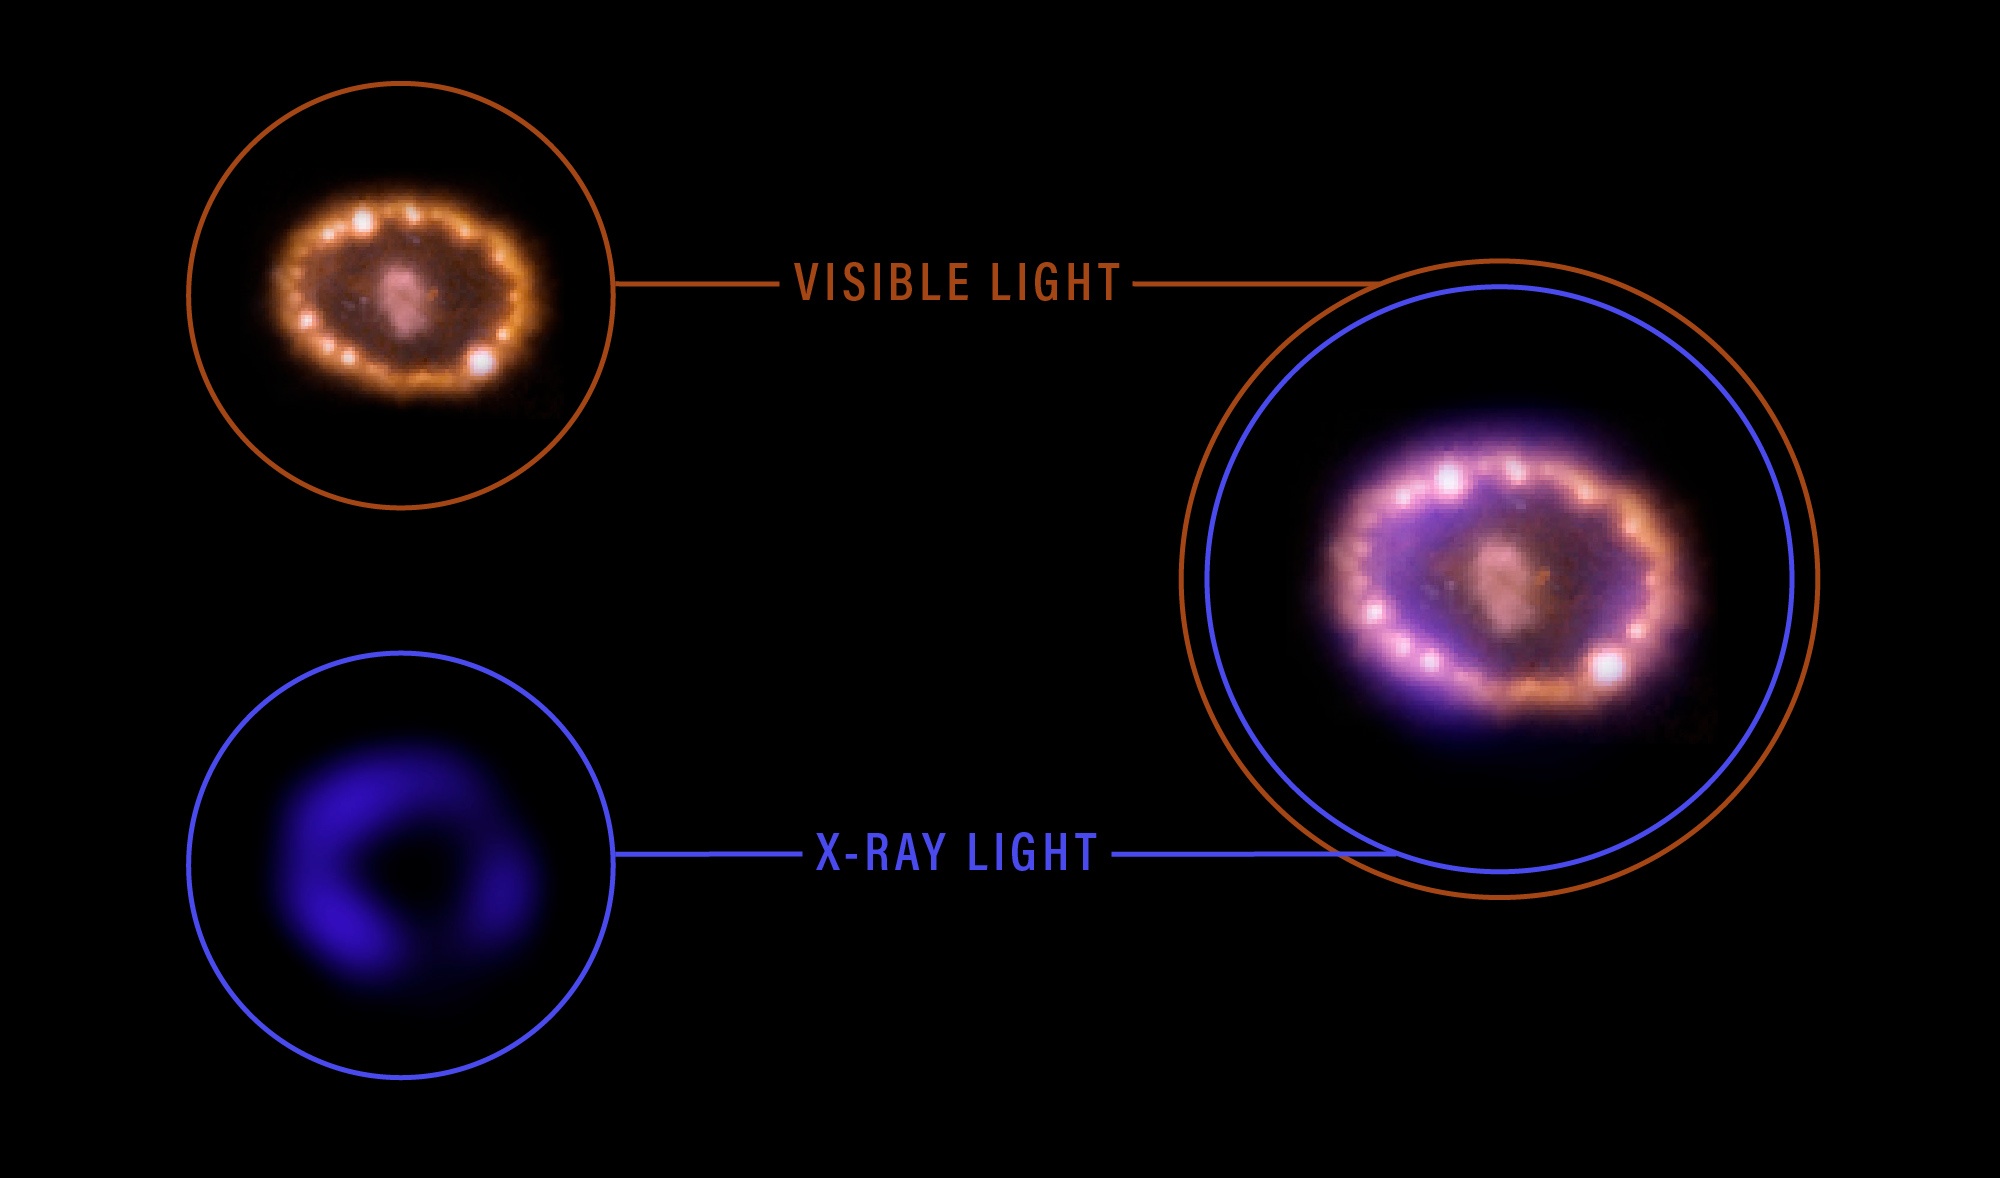 Rings of overlapping X-ray and visible light surround splotch